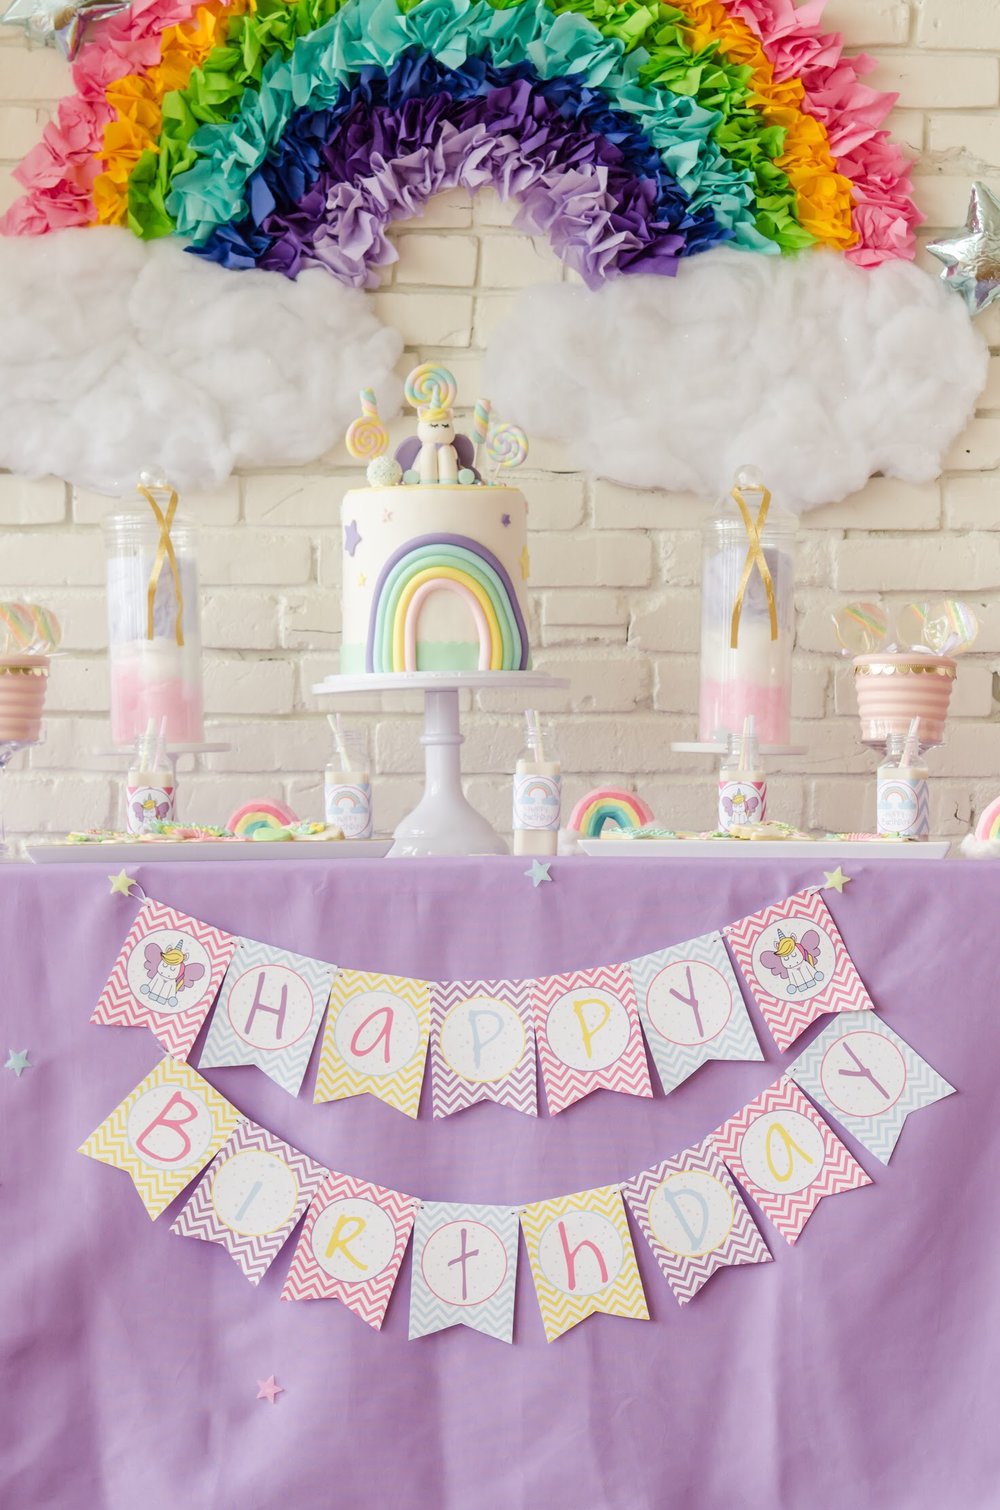 Details about   x2 Personalised Birthday Banner Unicorn Children Kids Party Decoration 66 